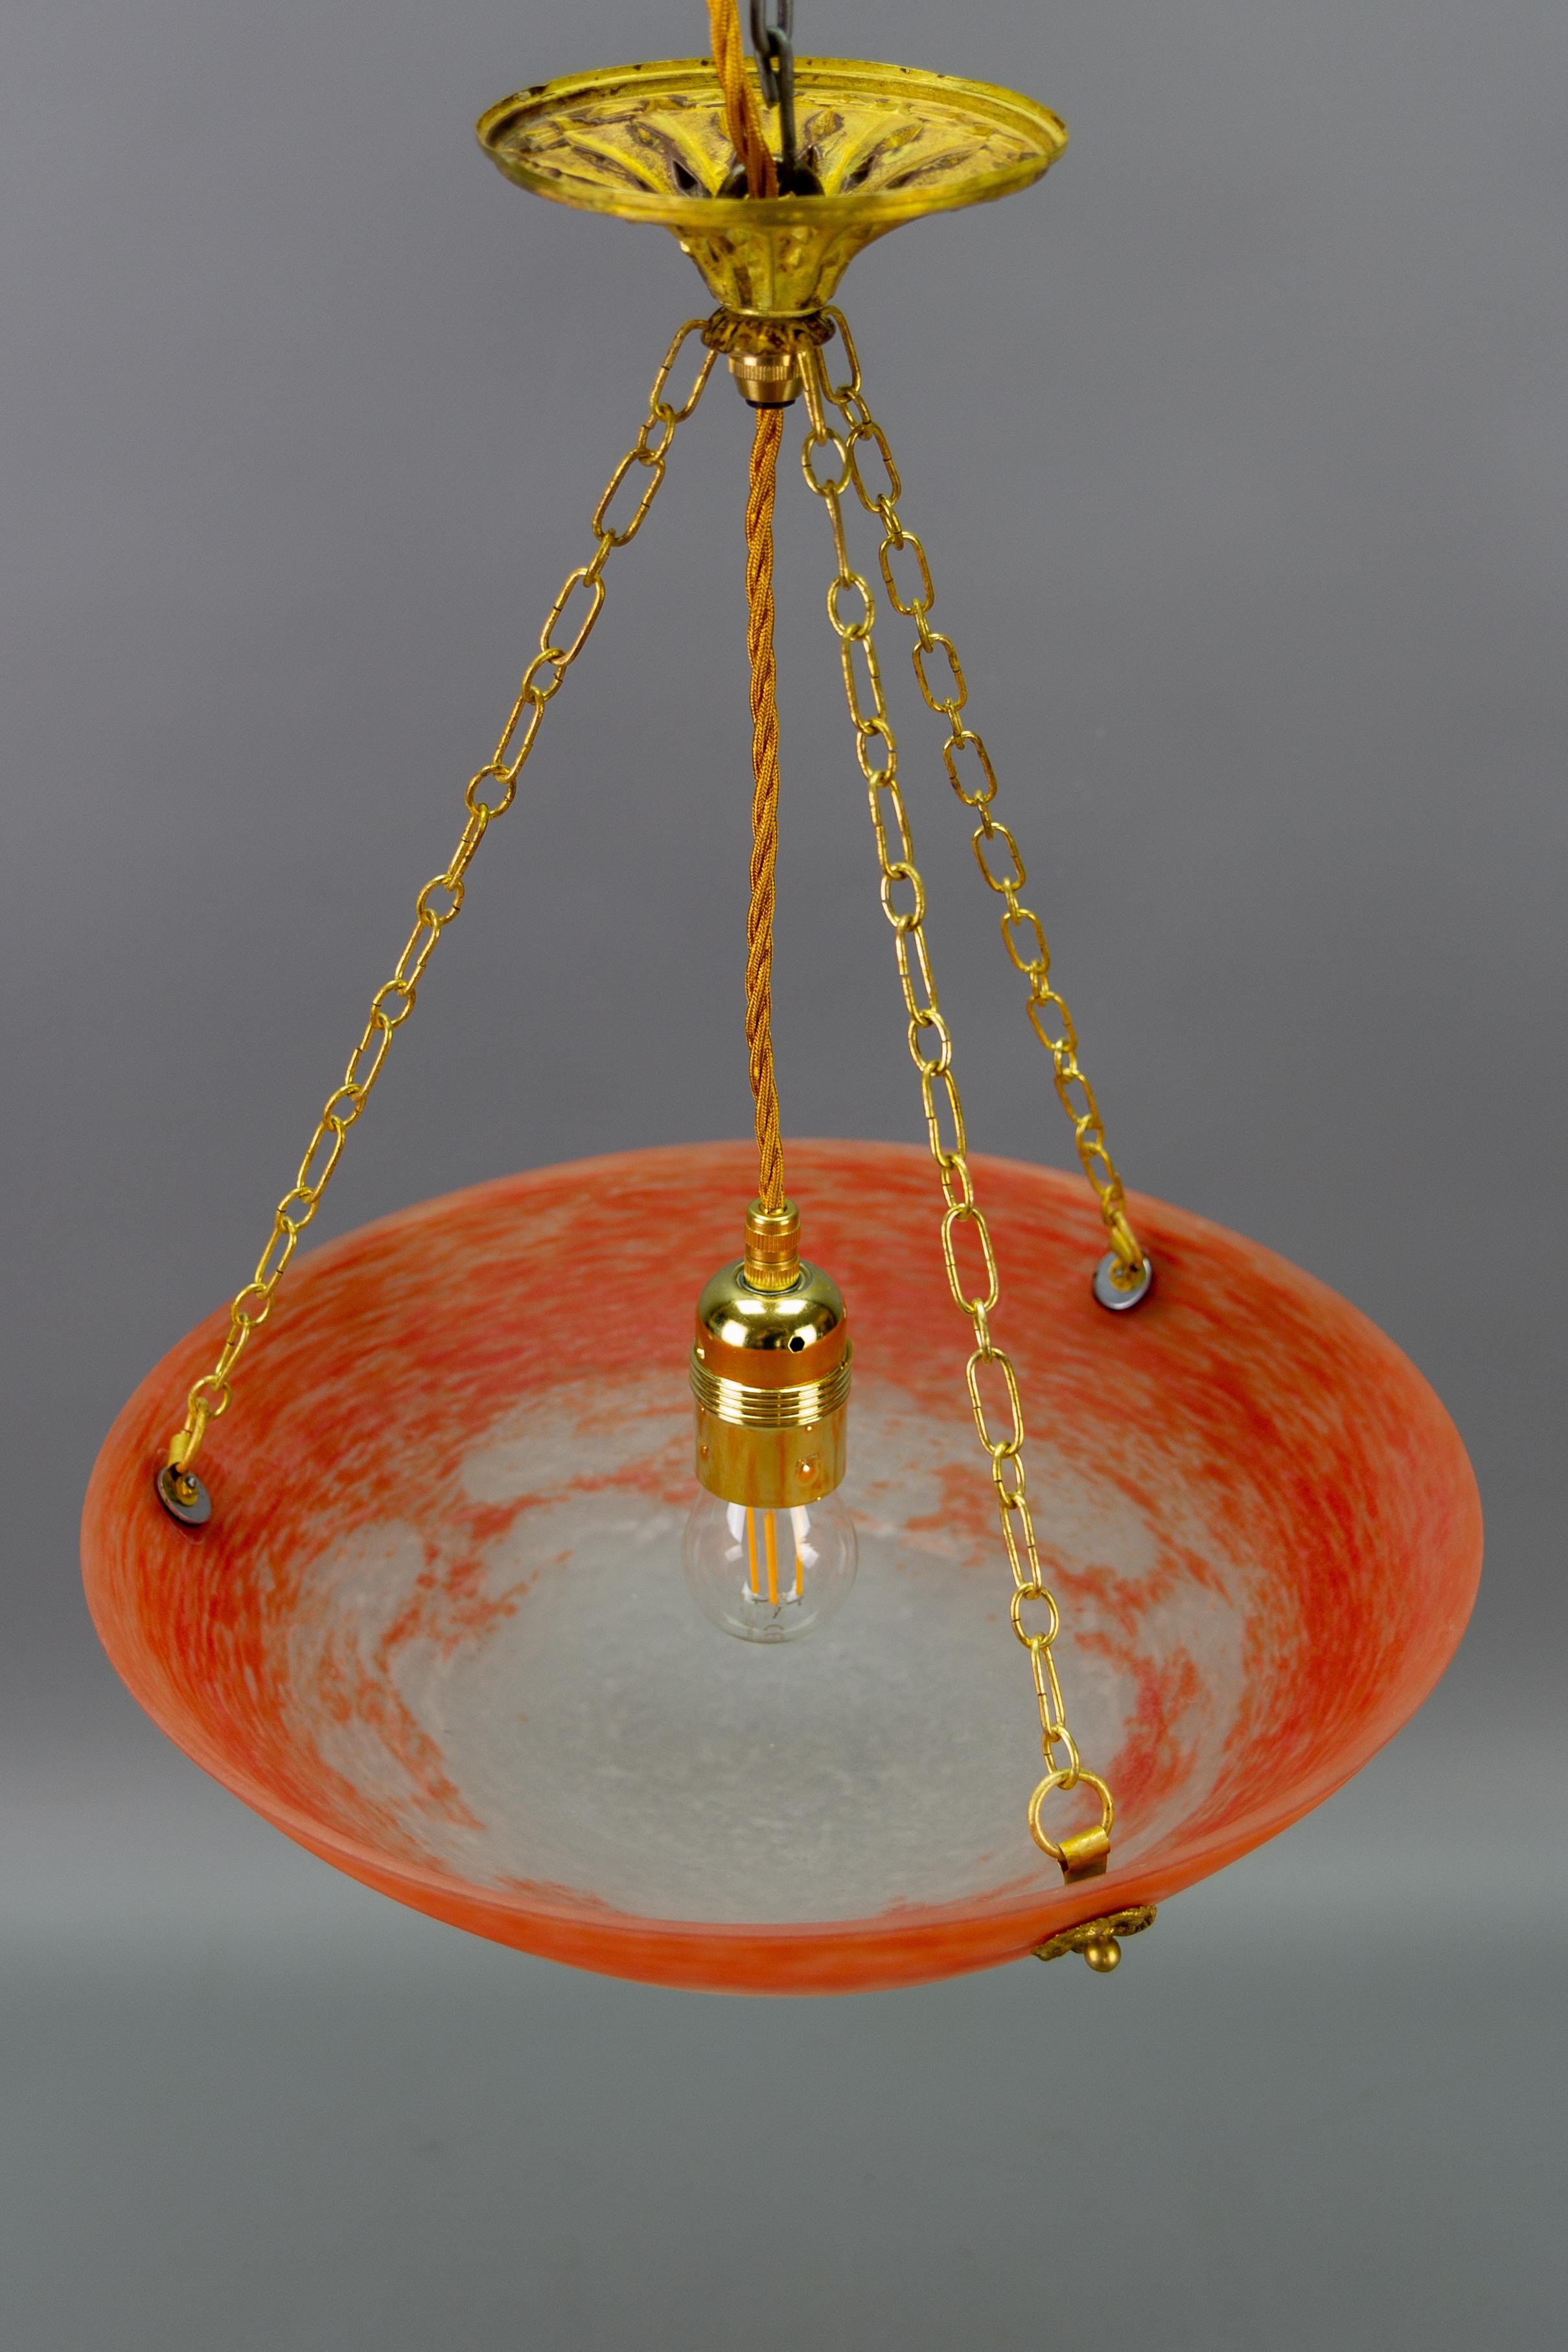 French Art Nouveau Orange and White Glass Pendant Light Signed Noverdy, 1920s For Sale 14